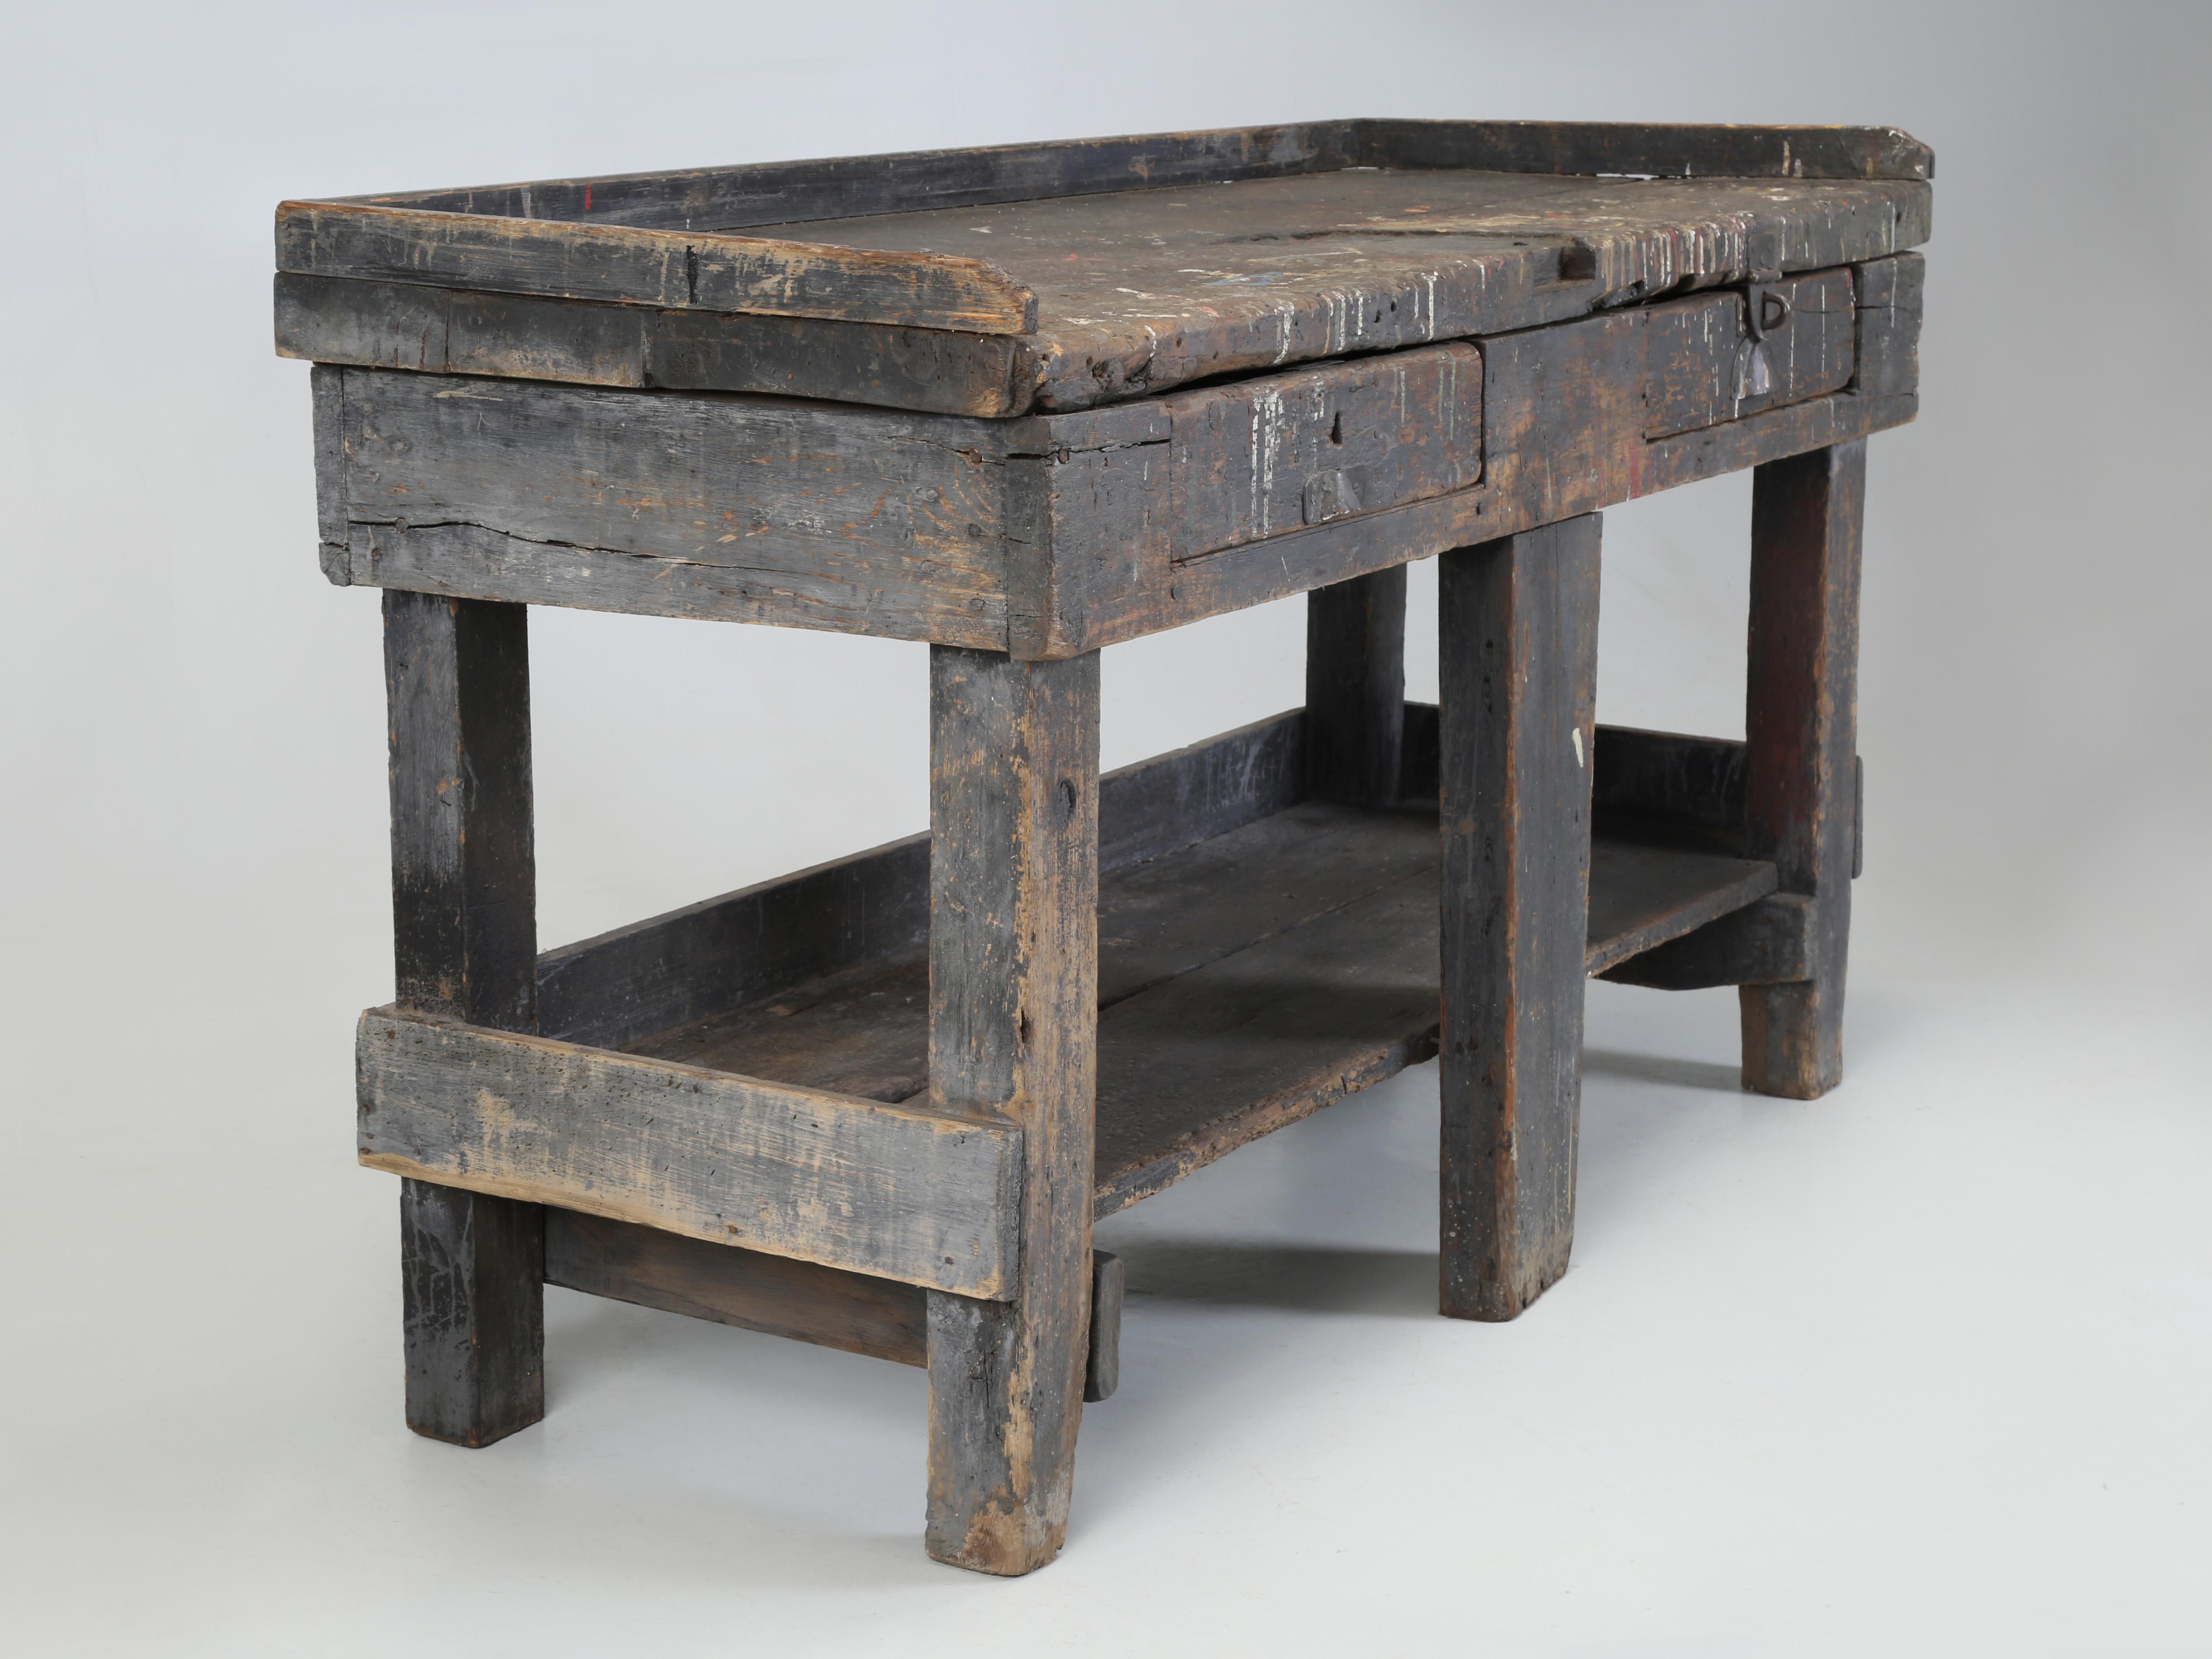 Antique Country Swedish Work Bench in Old Paint and Structurally Sound c1800's For Sale 5